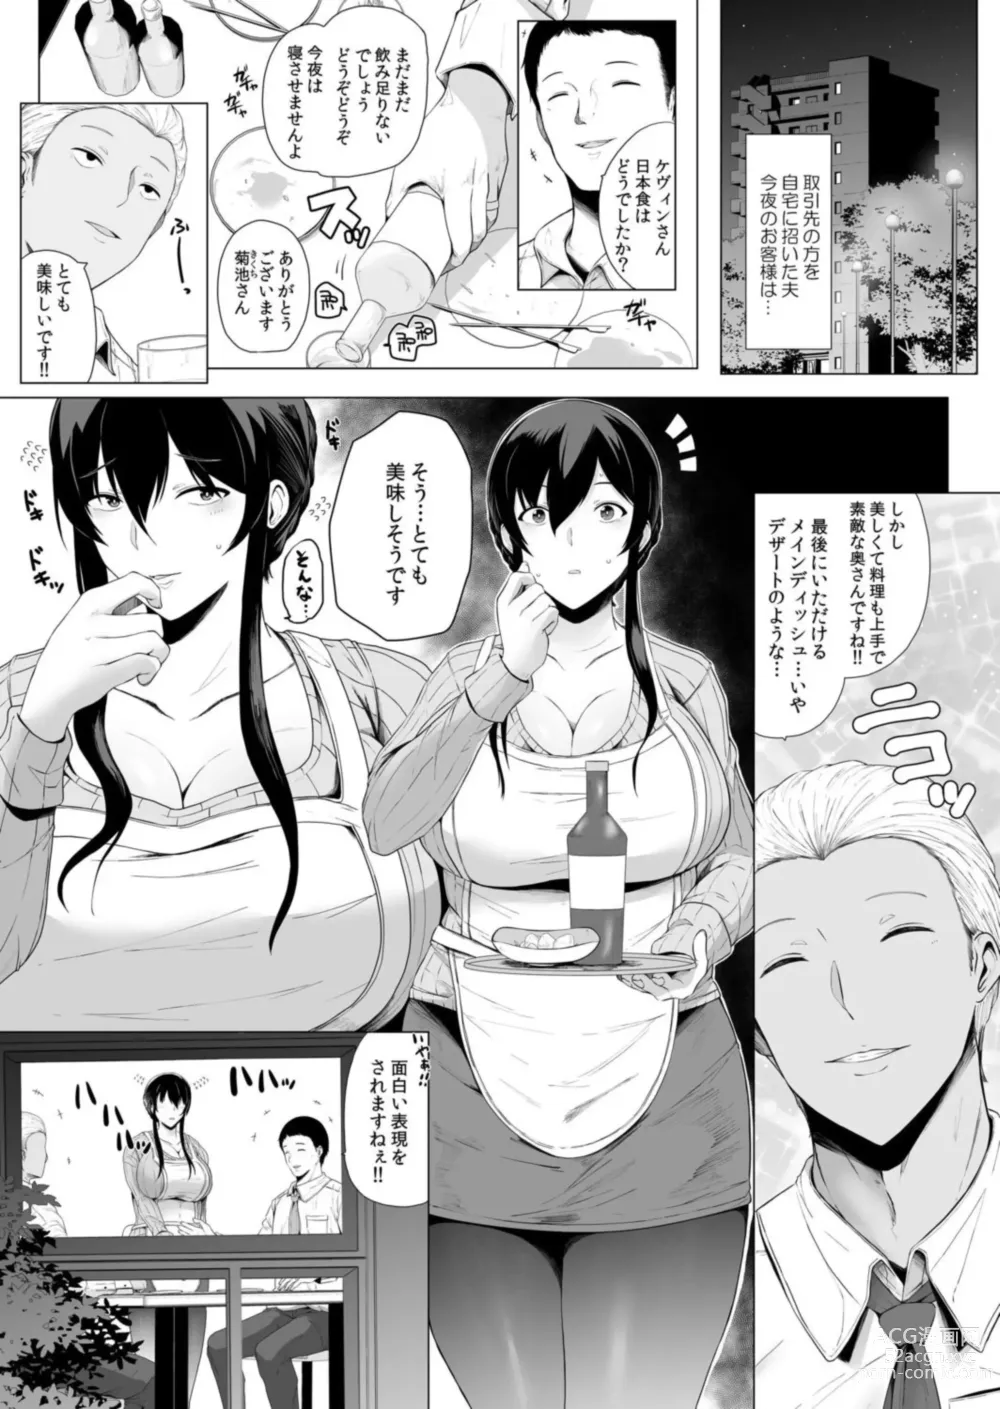 Page 15 of manga Netorare With An Unequaled Foreigner... ~I Fall Into Non-Standard SEX Bigger Than Him 2